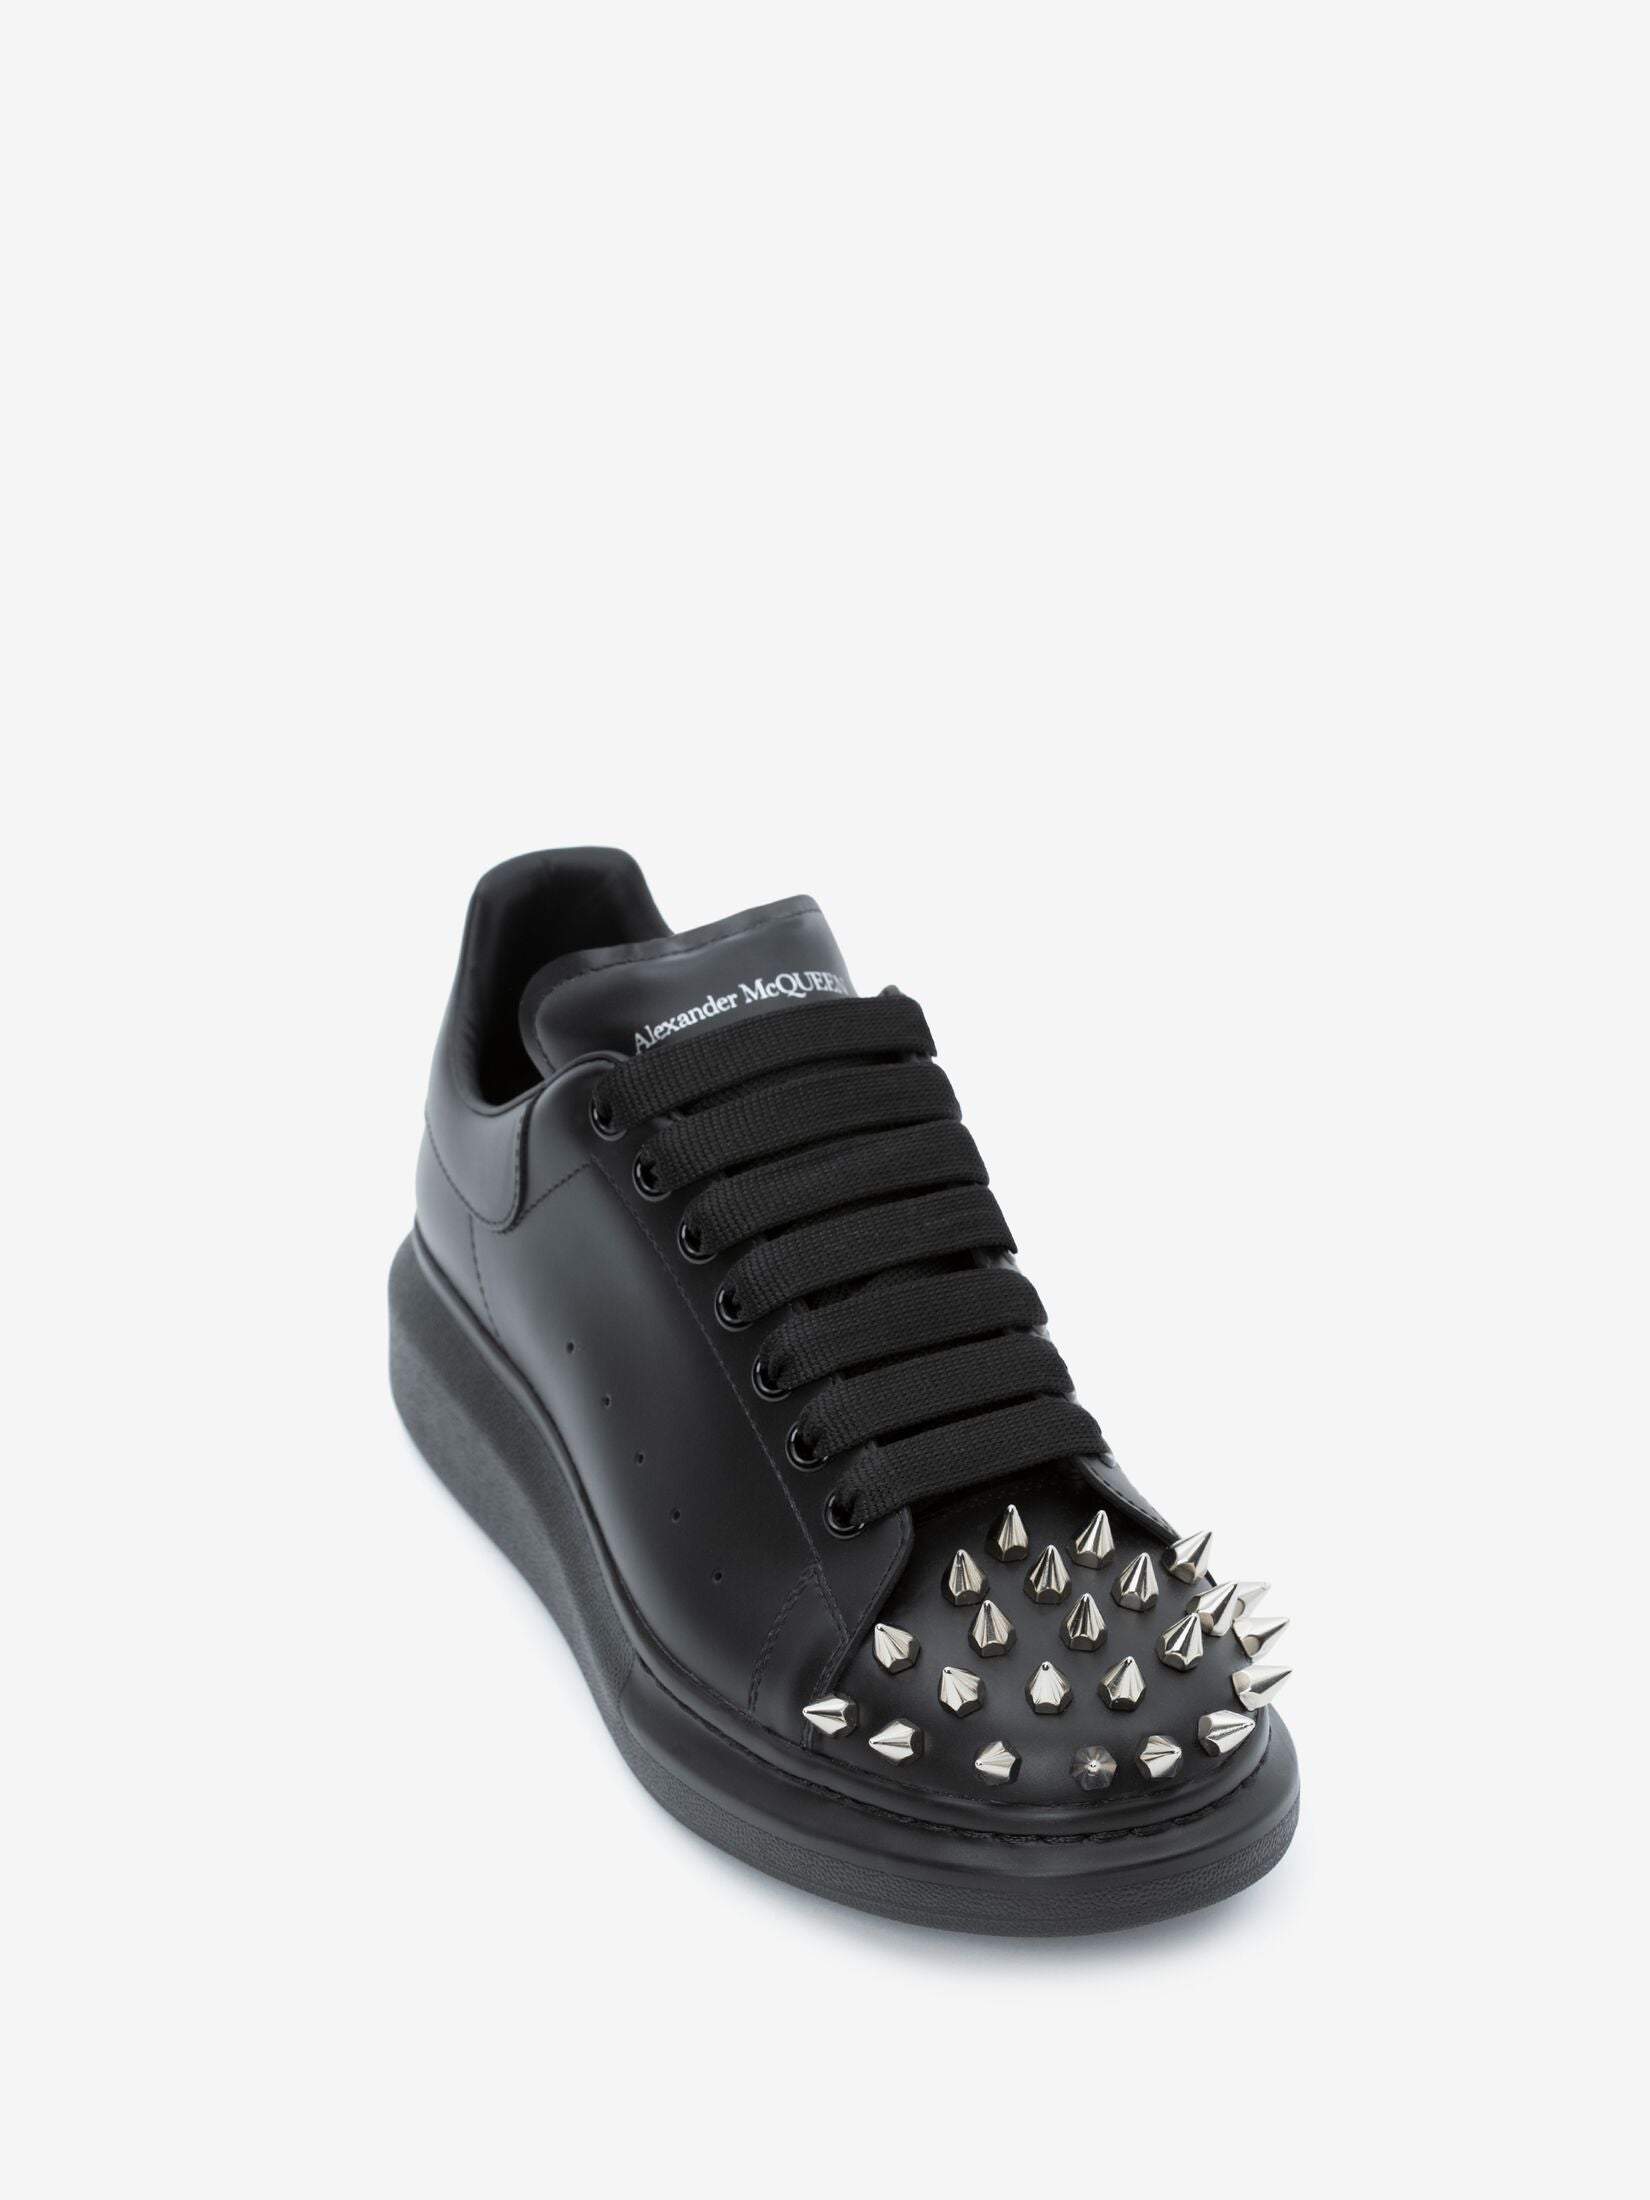 Alexander McQueen | Classic white and faded grey croc sneakers | Savannahs